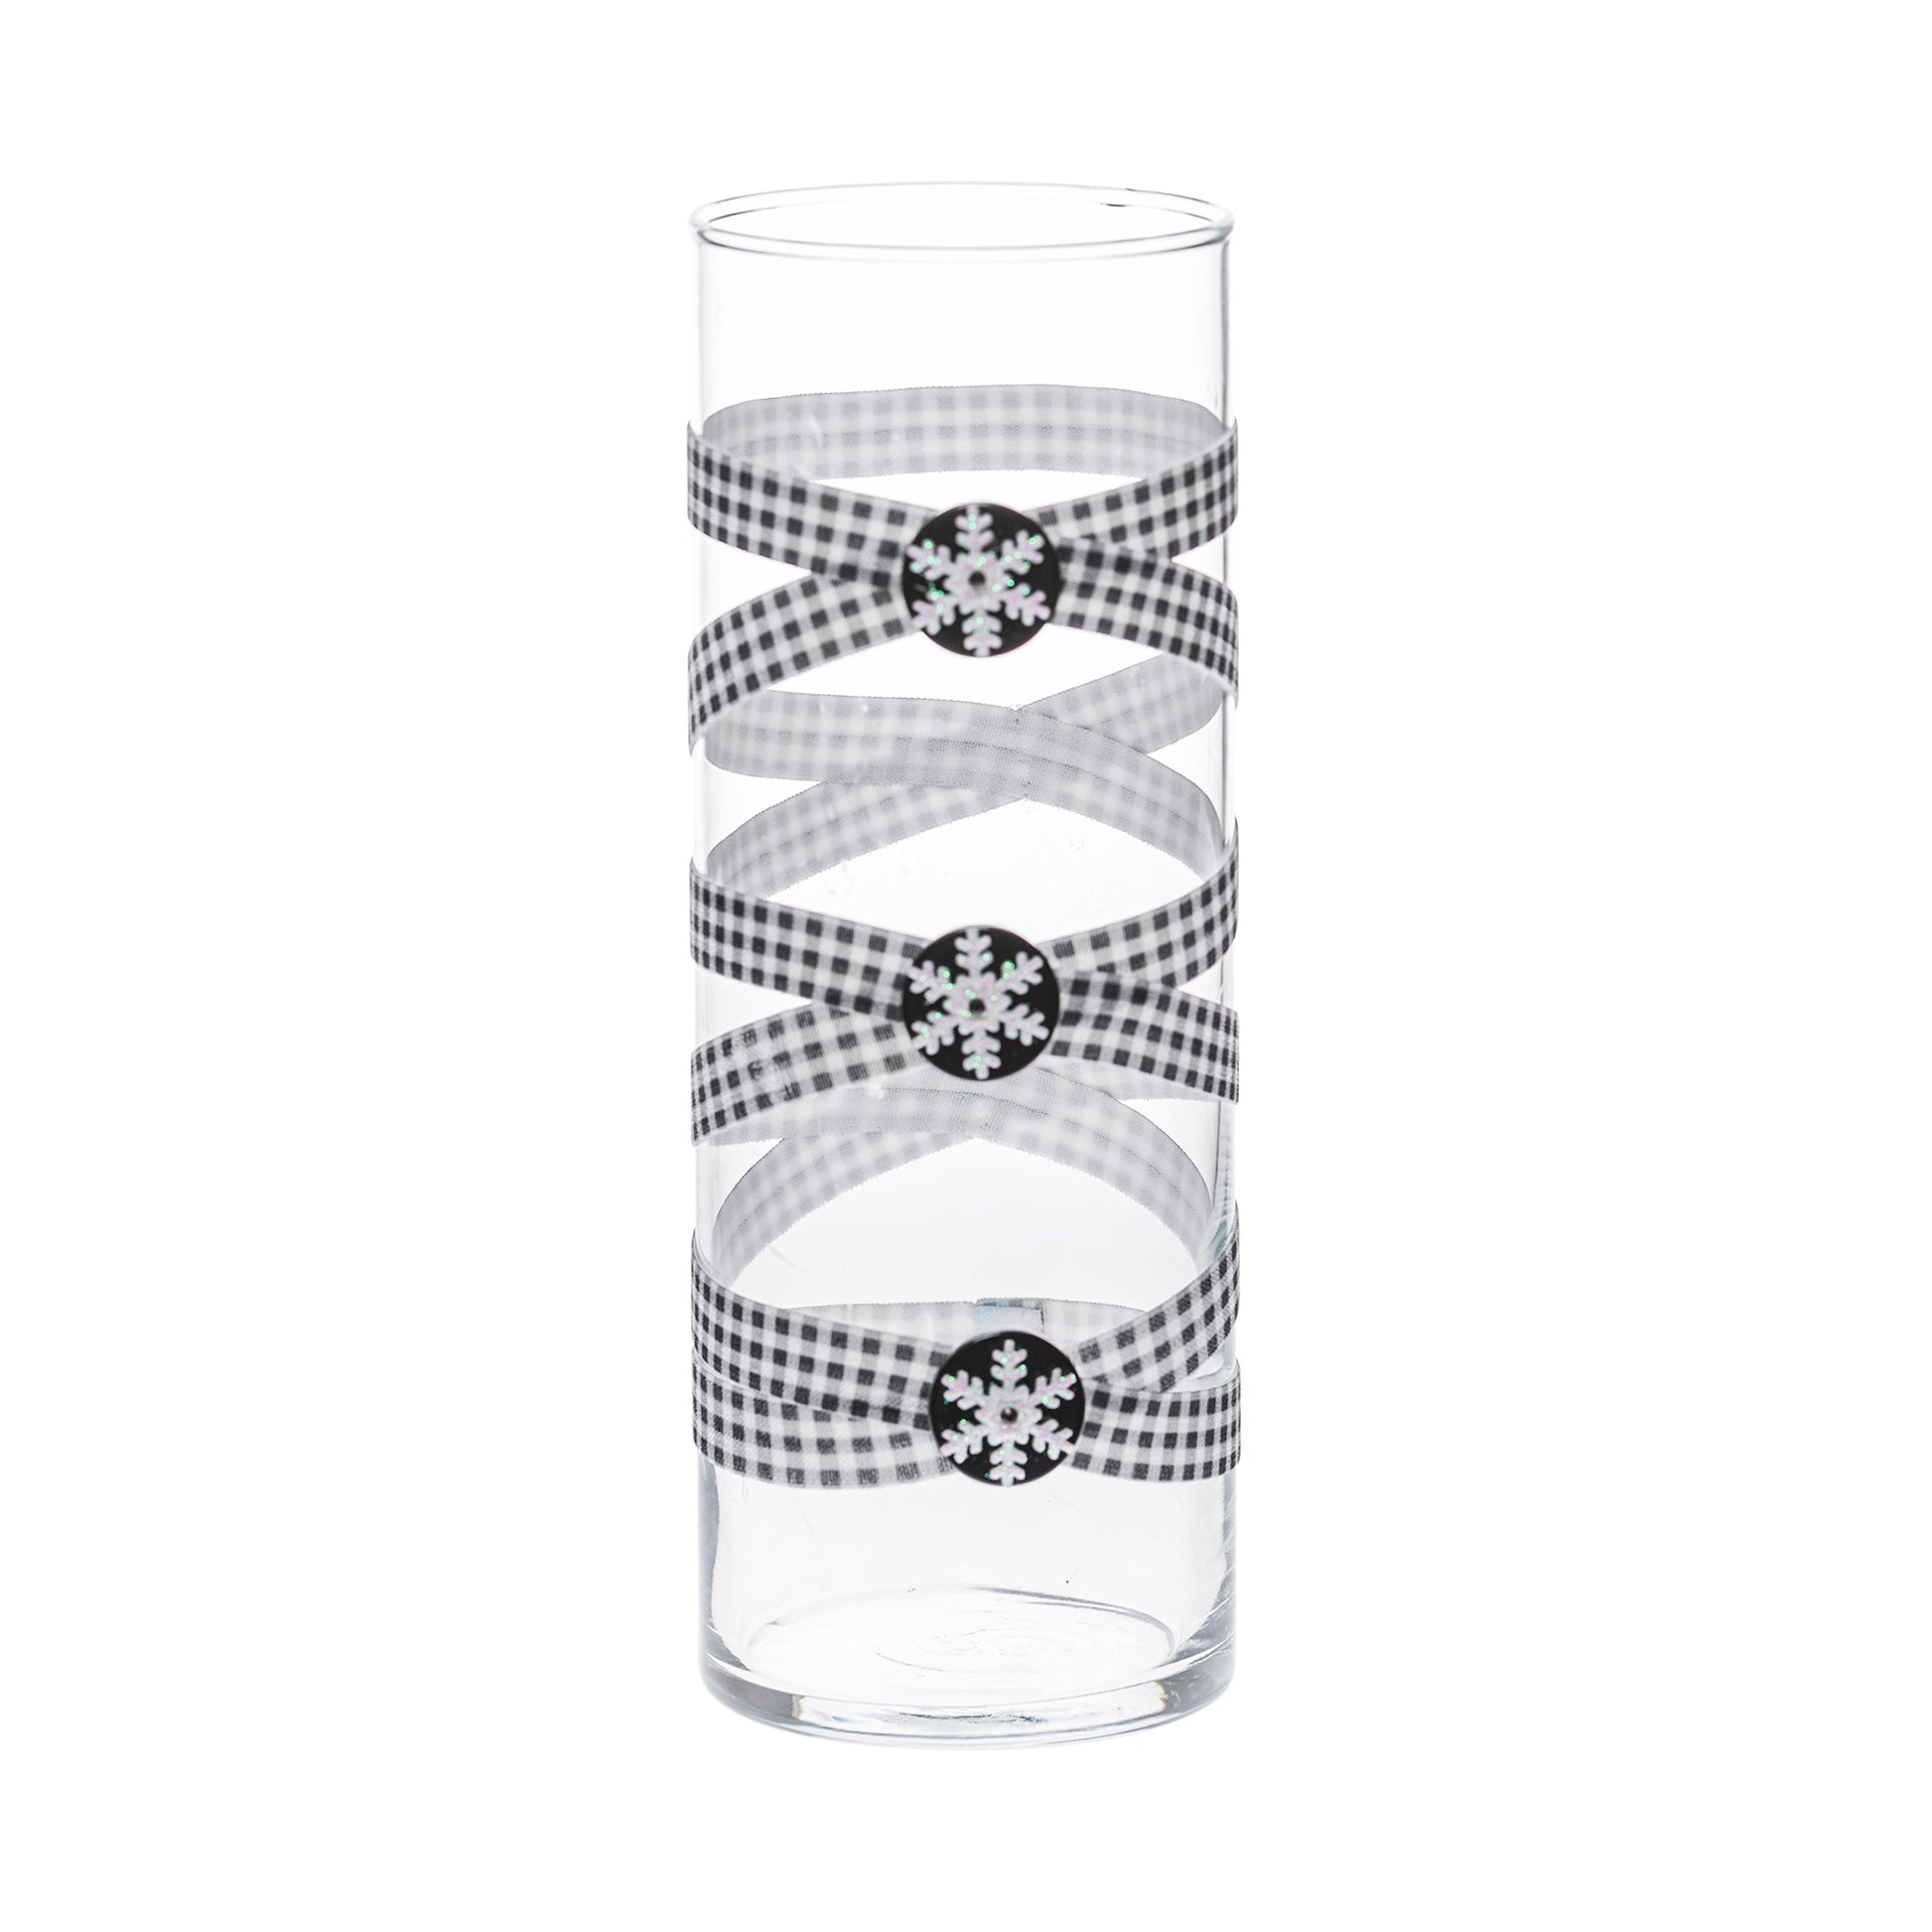 ront of Glass Wrappings 10" bud vase wrapped in black & white check elastic, decorated with 3 shiny snowflakes.